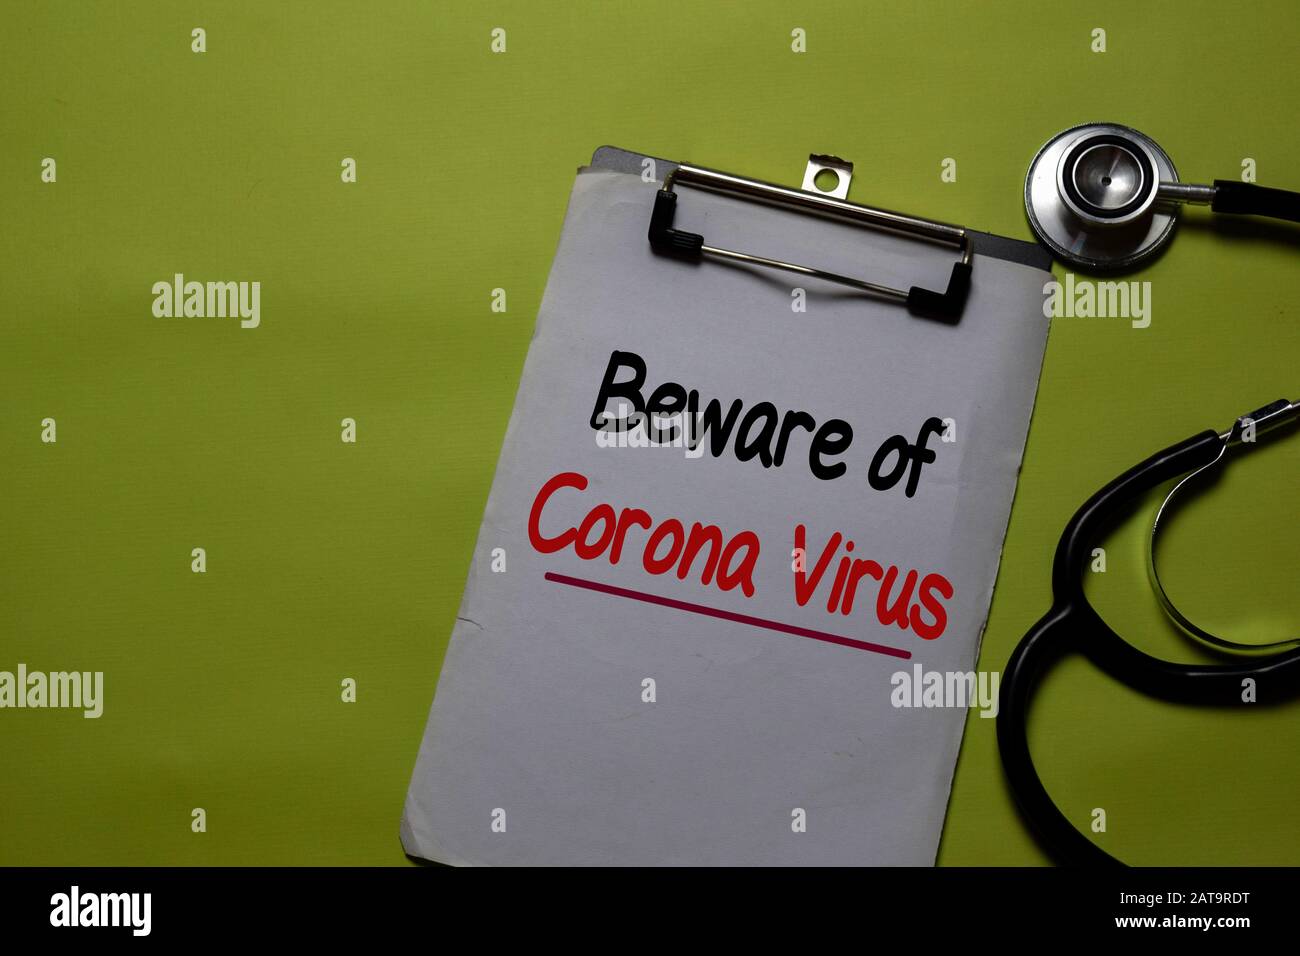 Beware of Corona Virus write on a paperwork isolated on Office Desk. Mysterious Viral Pneumonia in Wuhan, China. Healthcare/Medical concept Stock Photo